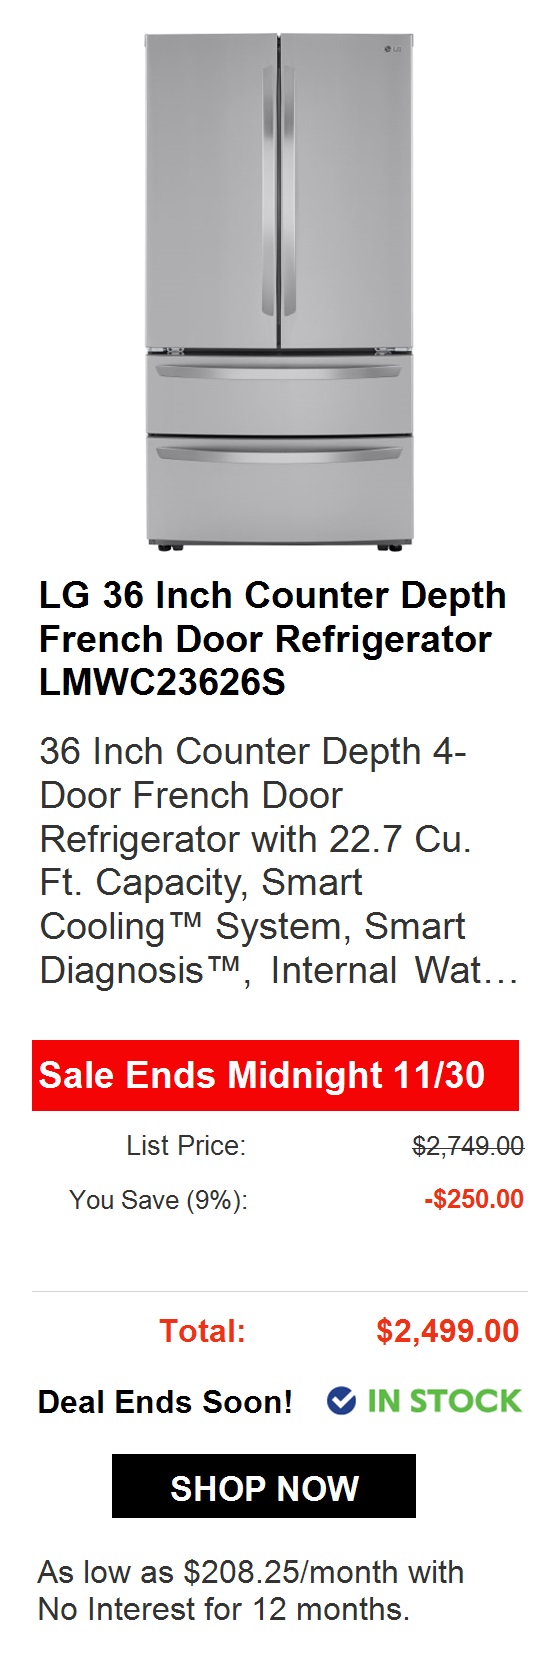  LG 36 Counter Depth French Door Refrigerator LMWC23626S 36 Inch Counter Depth 4- Door French Door Refrigerator with 22.7 Cu. Ft. Capacity, Smart Cooling System, Smart Diagnosis, Internal Wat... Sale Ends Midnight 1130 List Price: $2,749.00 You Save 27%: -$750.10 Total: $1,998.90 @ IN STOCK As low as $111.05month with No Interest for 18 months. 